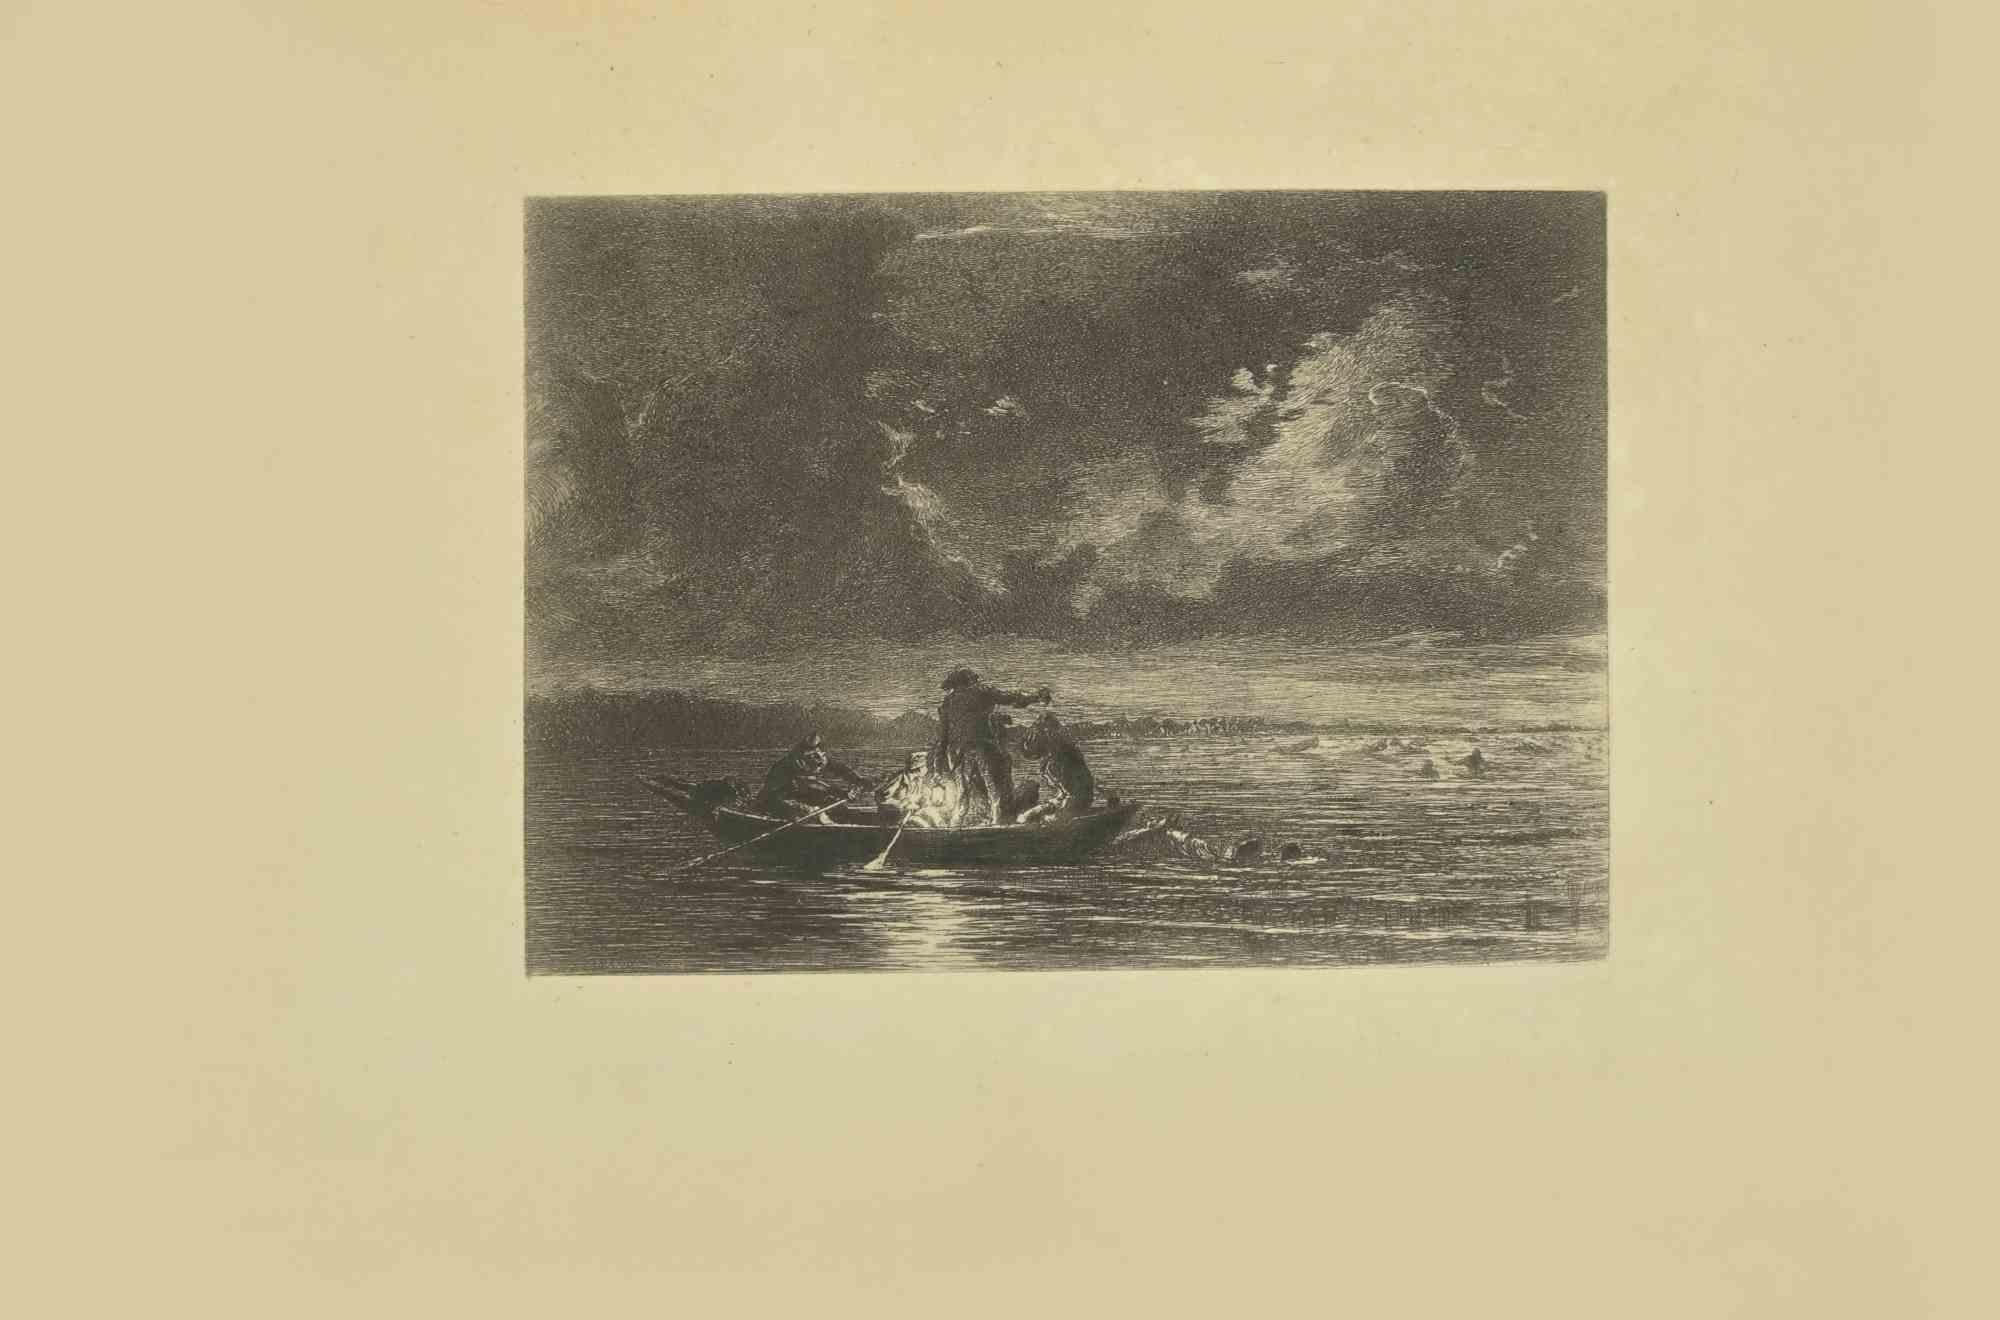 Fishermen is an original etching realized by Eugène Burnand  (1850-1921) in the Late 19th century.

Good conditions with foxing.

The artwork is realized through short and deft strokes, an admirable scene created by realistic mastery through